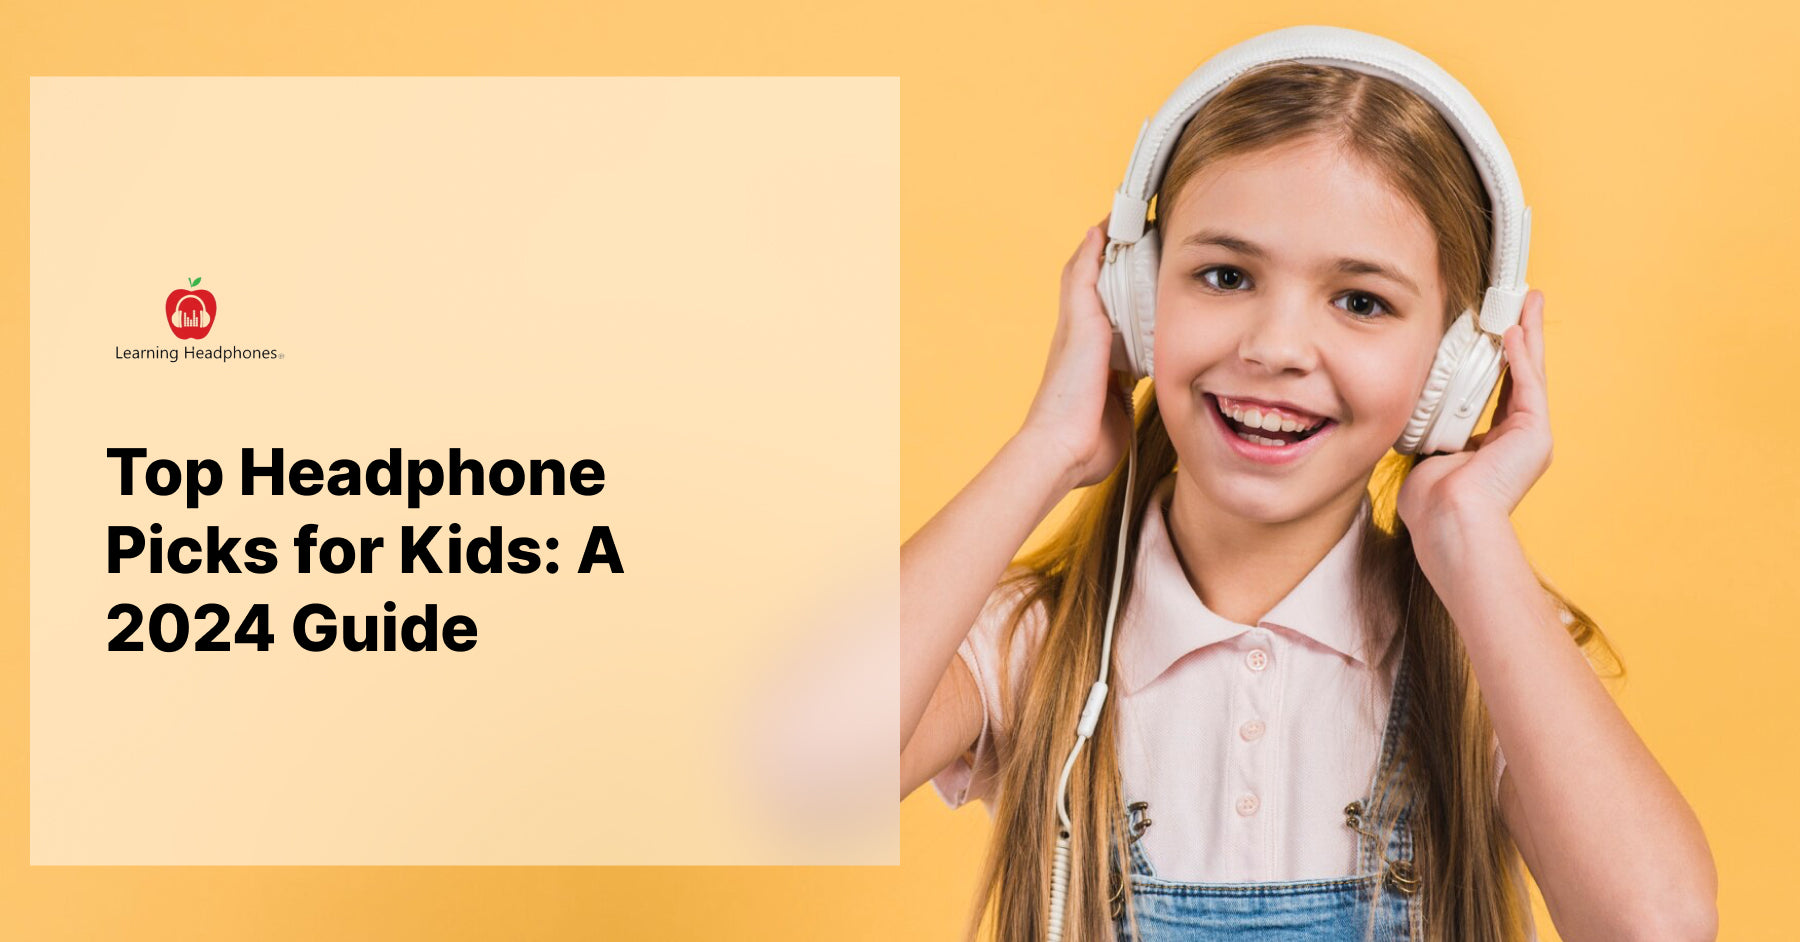 Top Headphone Picks for Kids: A 2024 Guide